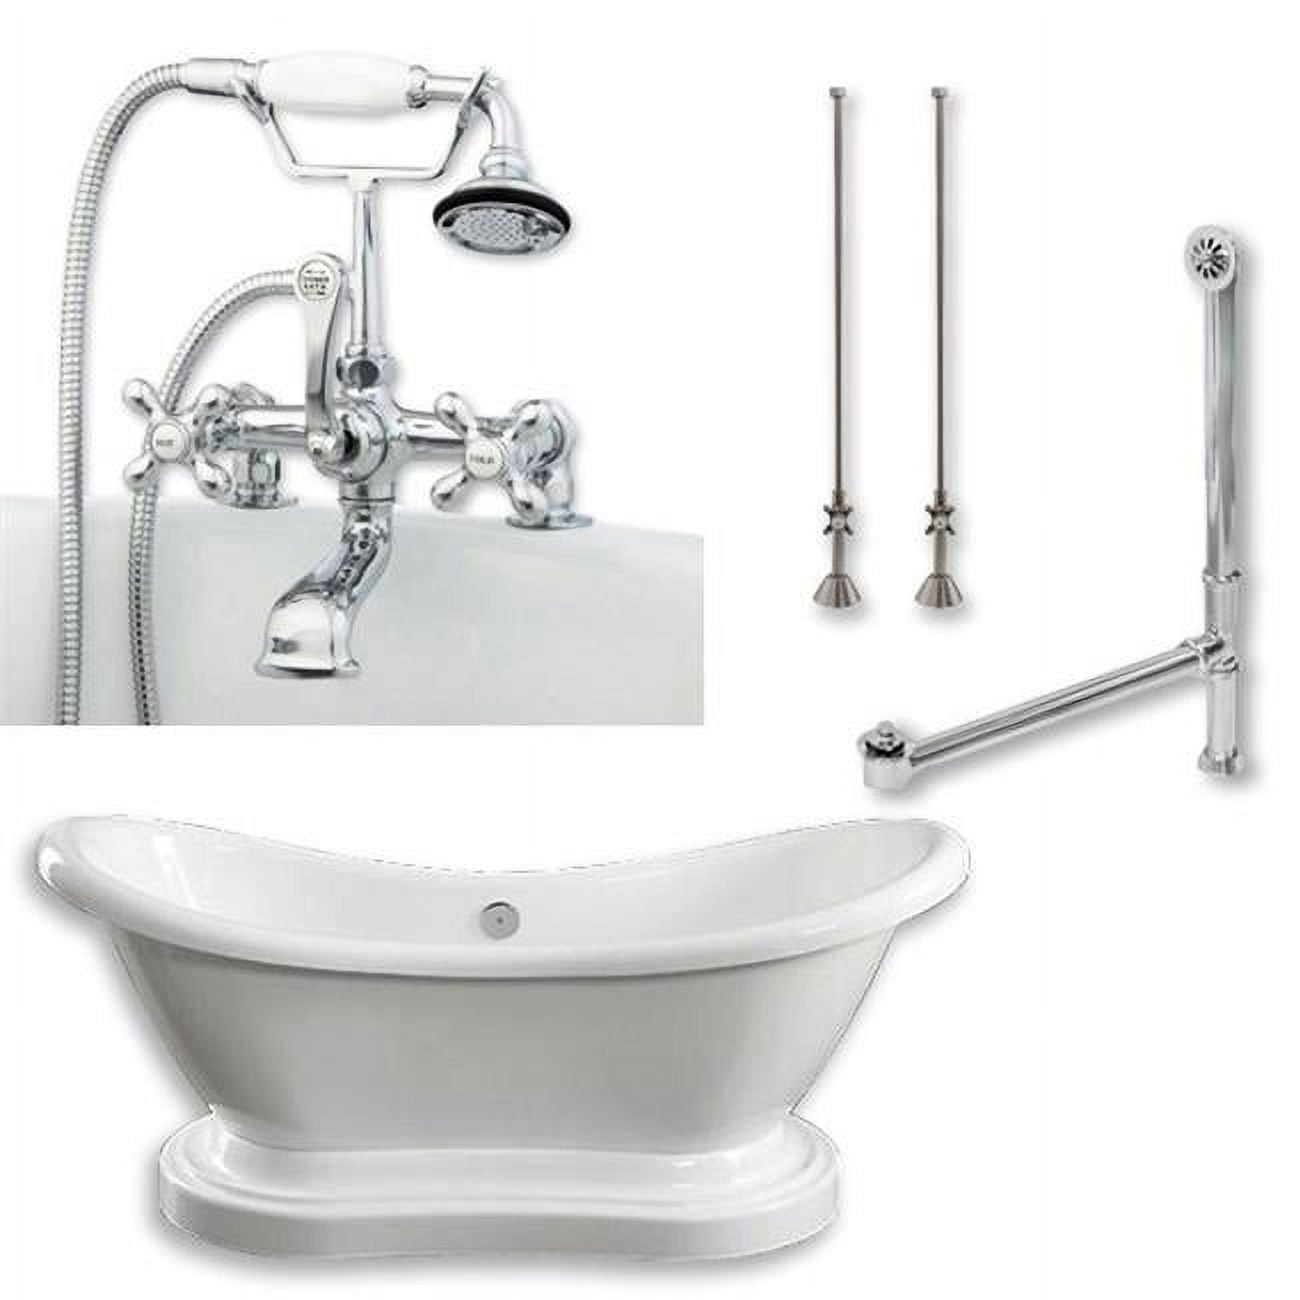 Acrylic Double Ended Slipper Tub With 6 In. Pedestal Holes Deck Risers, Classic Telephone Style Faucet & Chrome Plumbing